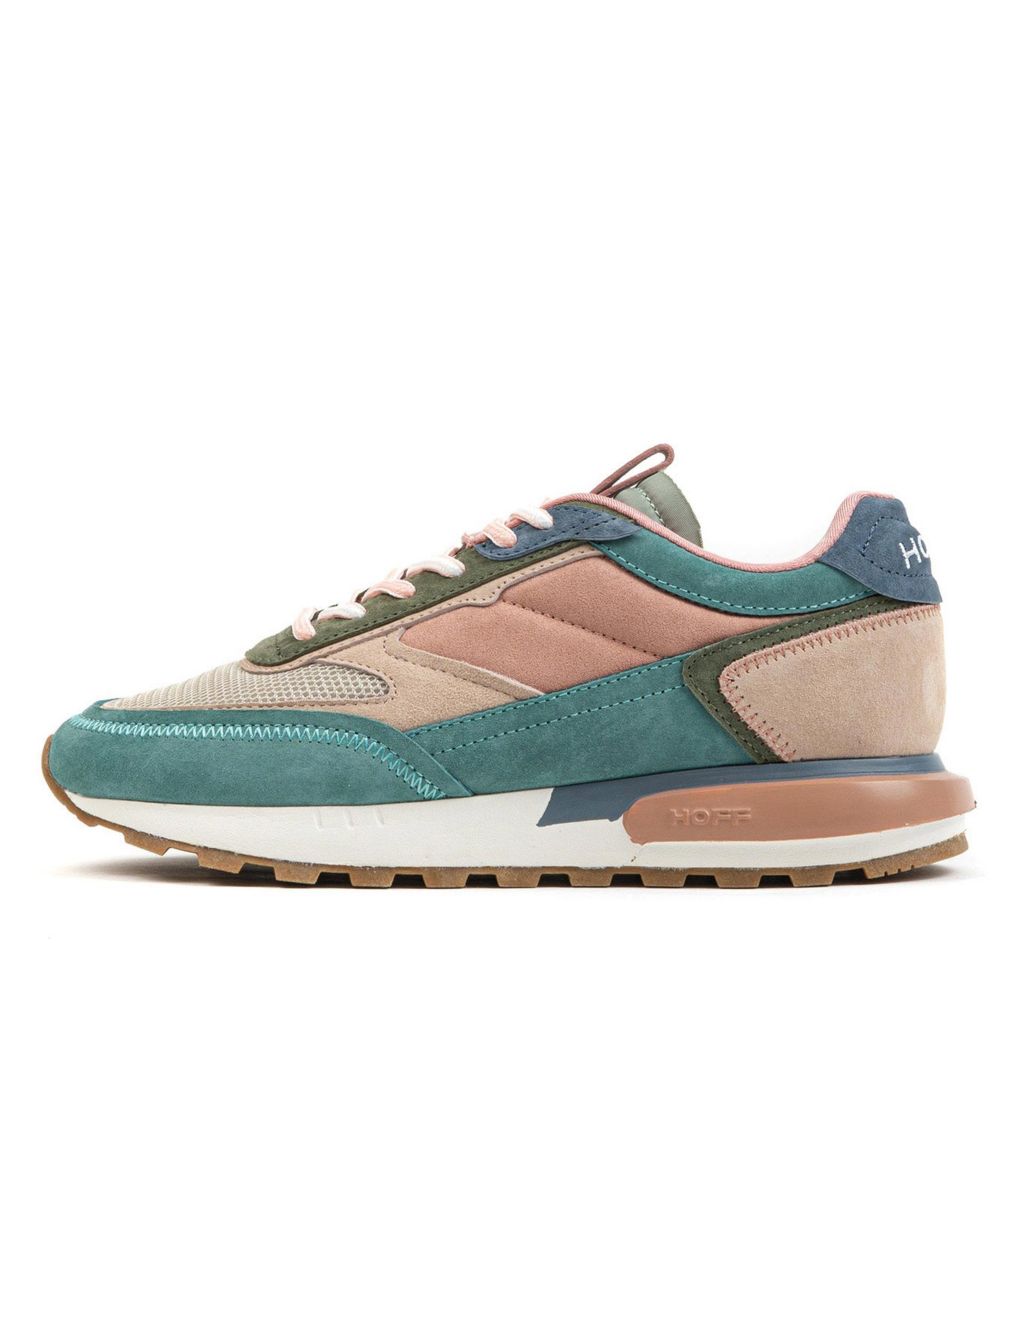 Tribe Trainers image 6